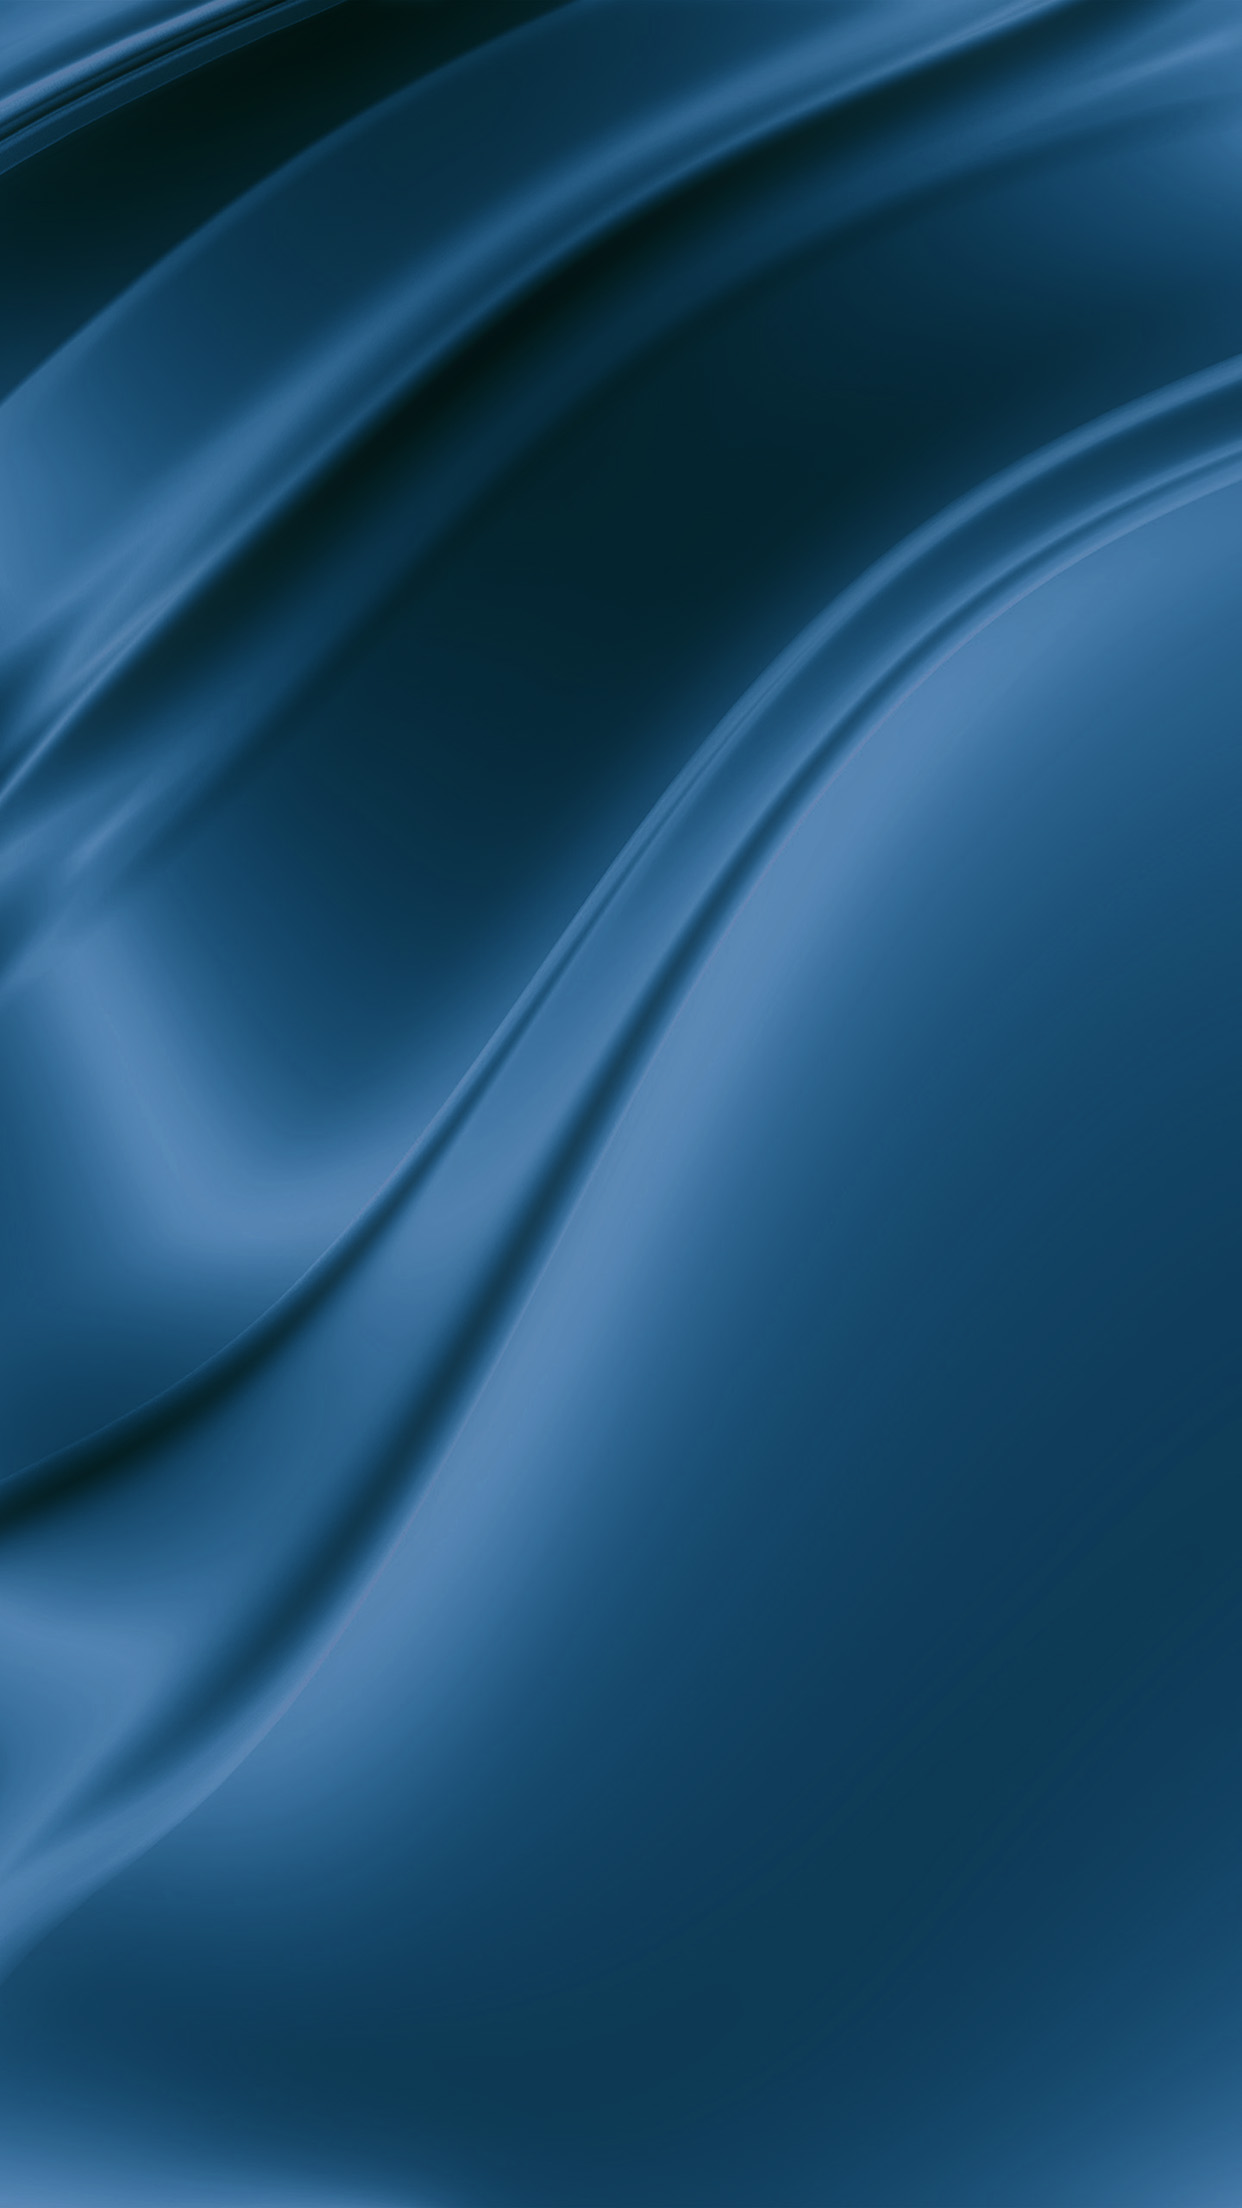 Blue And Silver Iphone - HD Wallpaper 